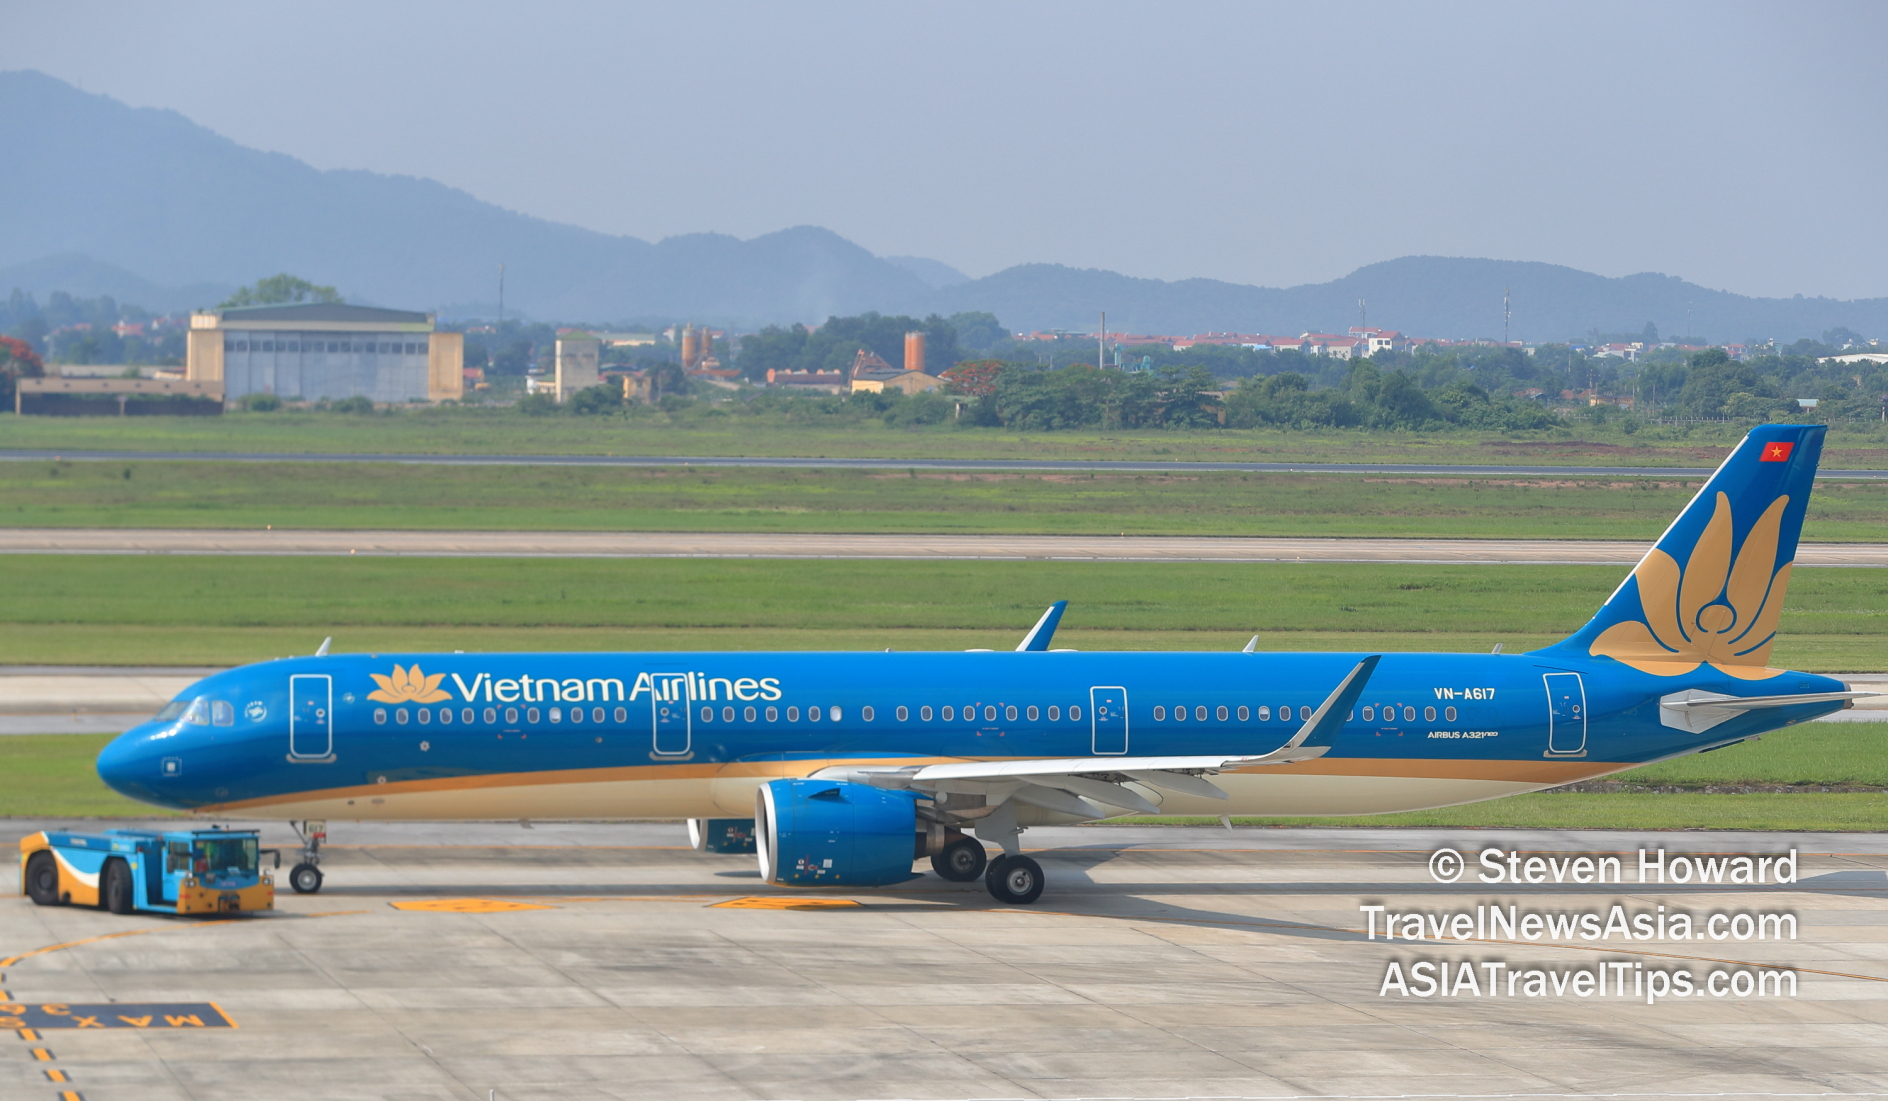 Vietnam Airlines A321neo VN-A617. Picture by Steven Howard of TravelNewsAsia.com Click to enlarge.